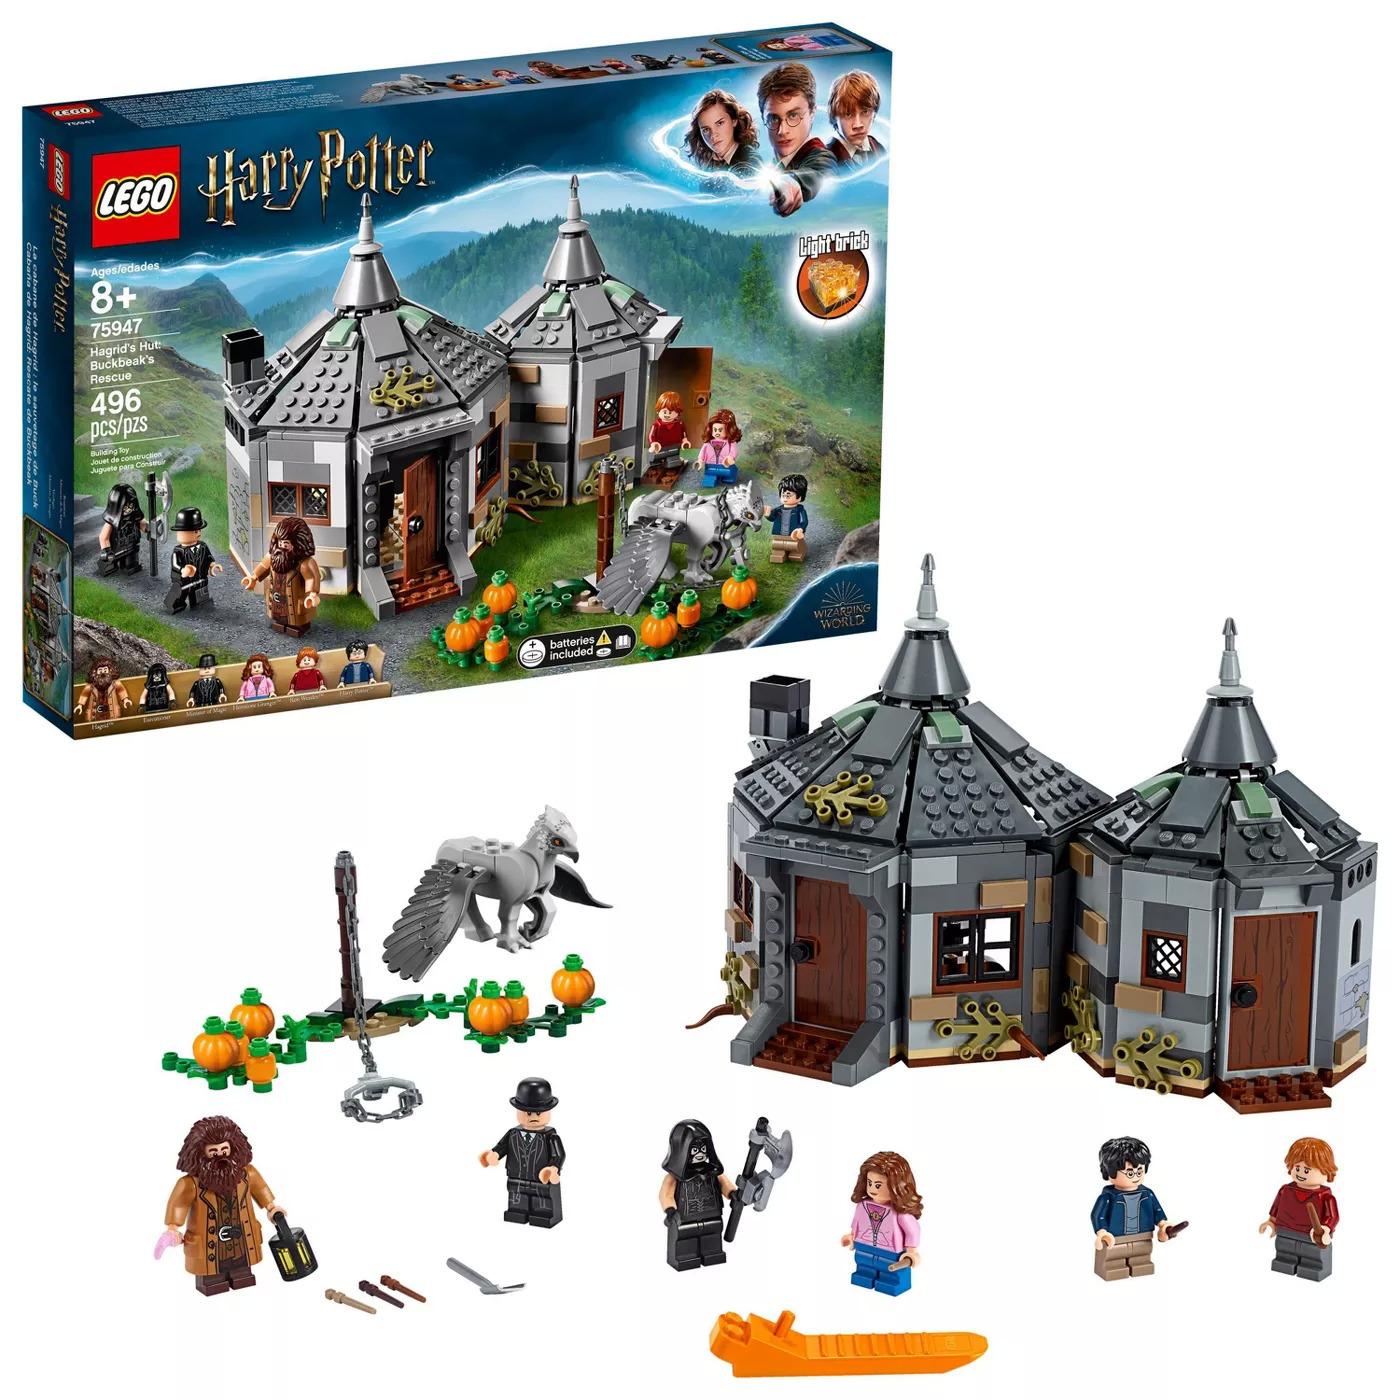 496-Piece LEGO Harry Potter Hagrids Hut for $29.99 Shipped